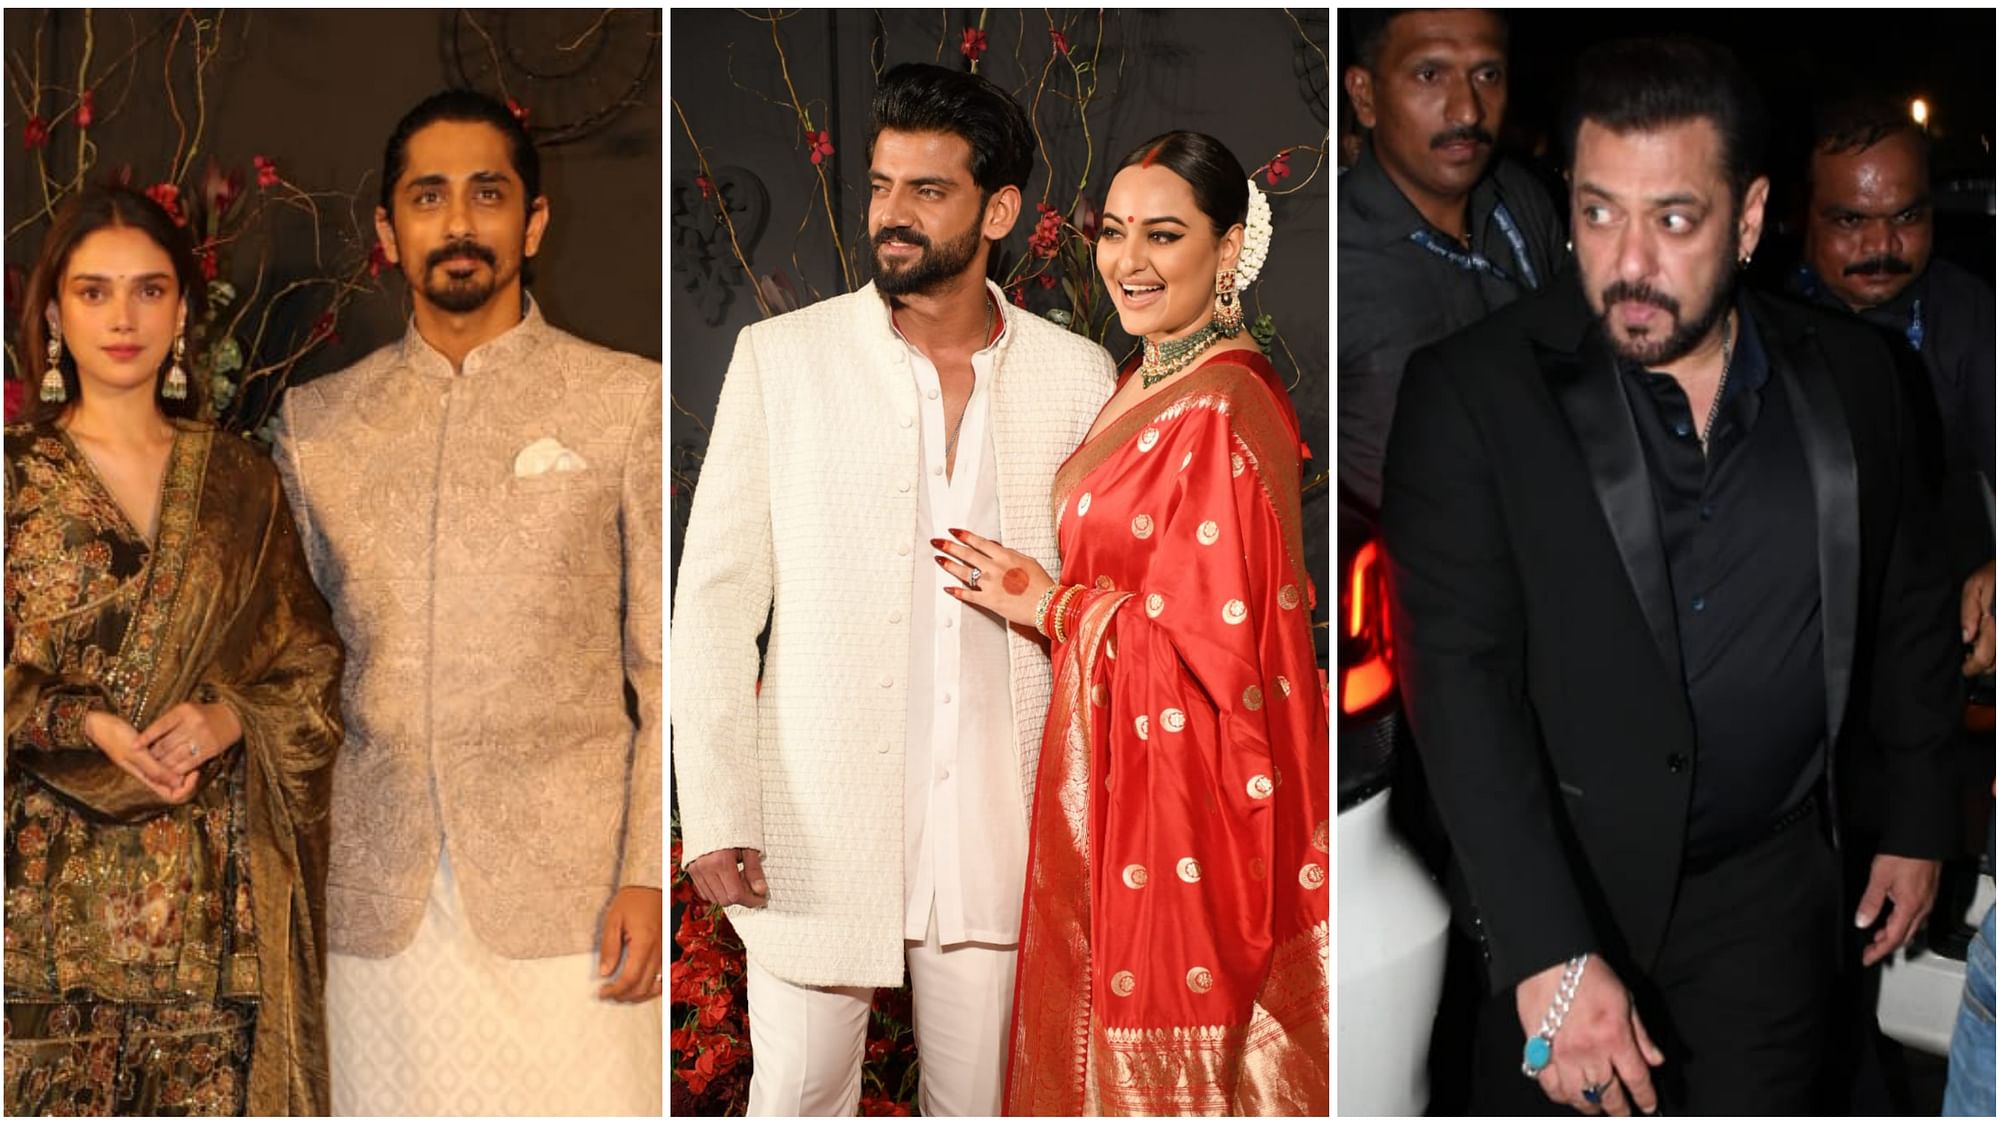 <div class="paragraphs"><p>Actors <a href="https://www.thequint.com/entertainment/celebrities/sonakshi-sinha-marries-zaheer-iqbal-a-timeline-of-their-relationship">Sonakshi Sinha and Zaheer Iqbal</a> hosted a grand reception in Mumbai.&nbsp;</p></div>